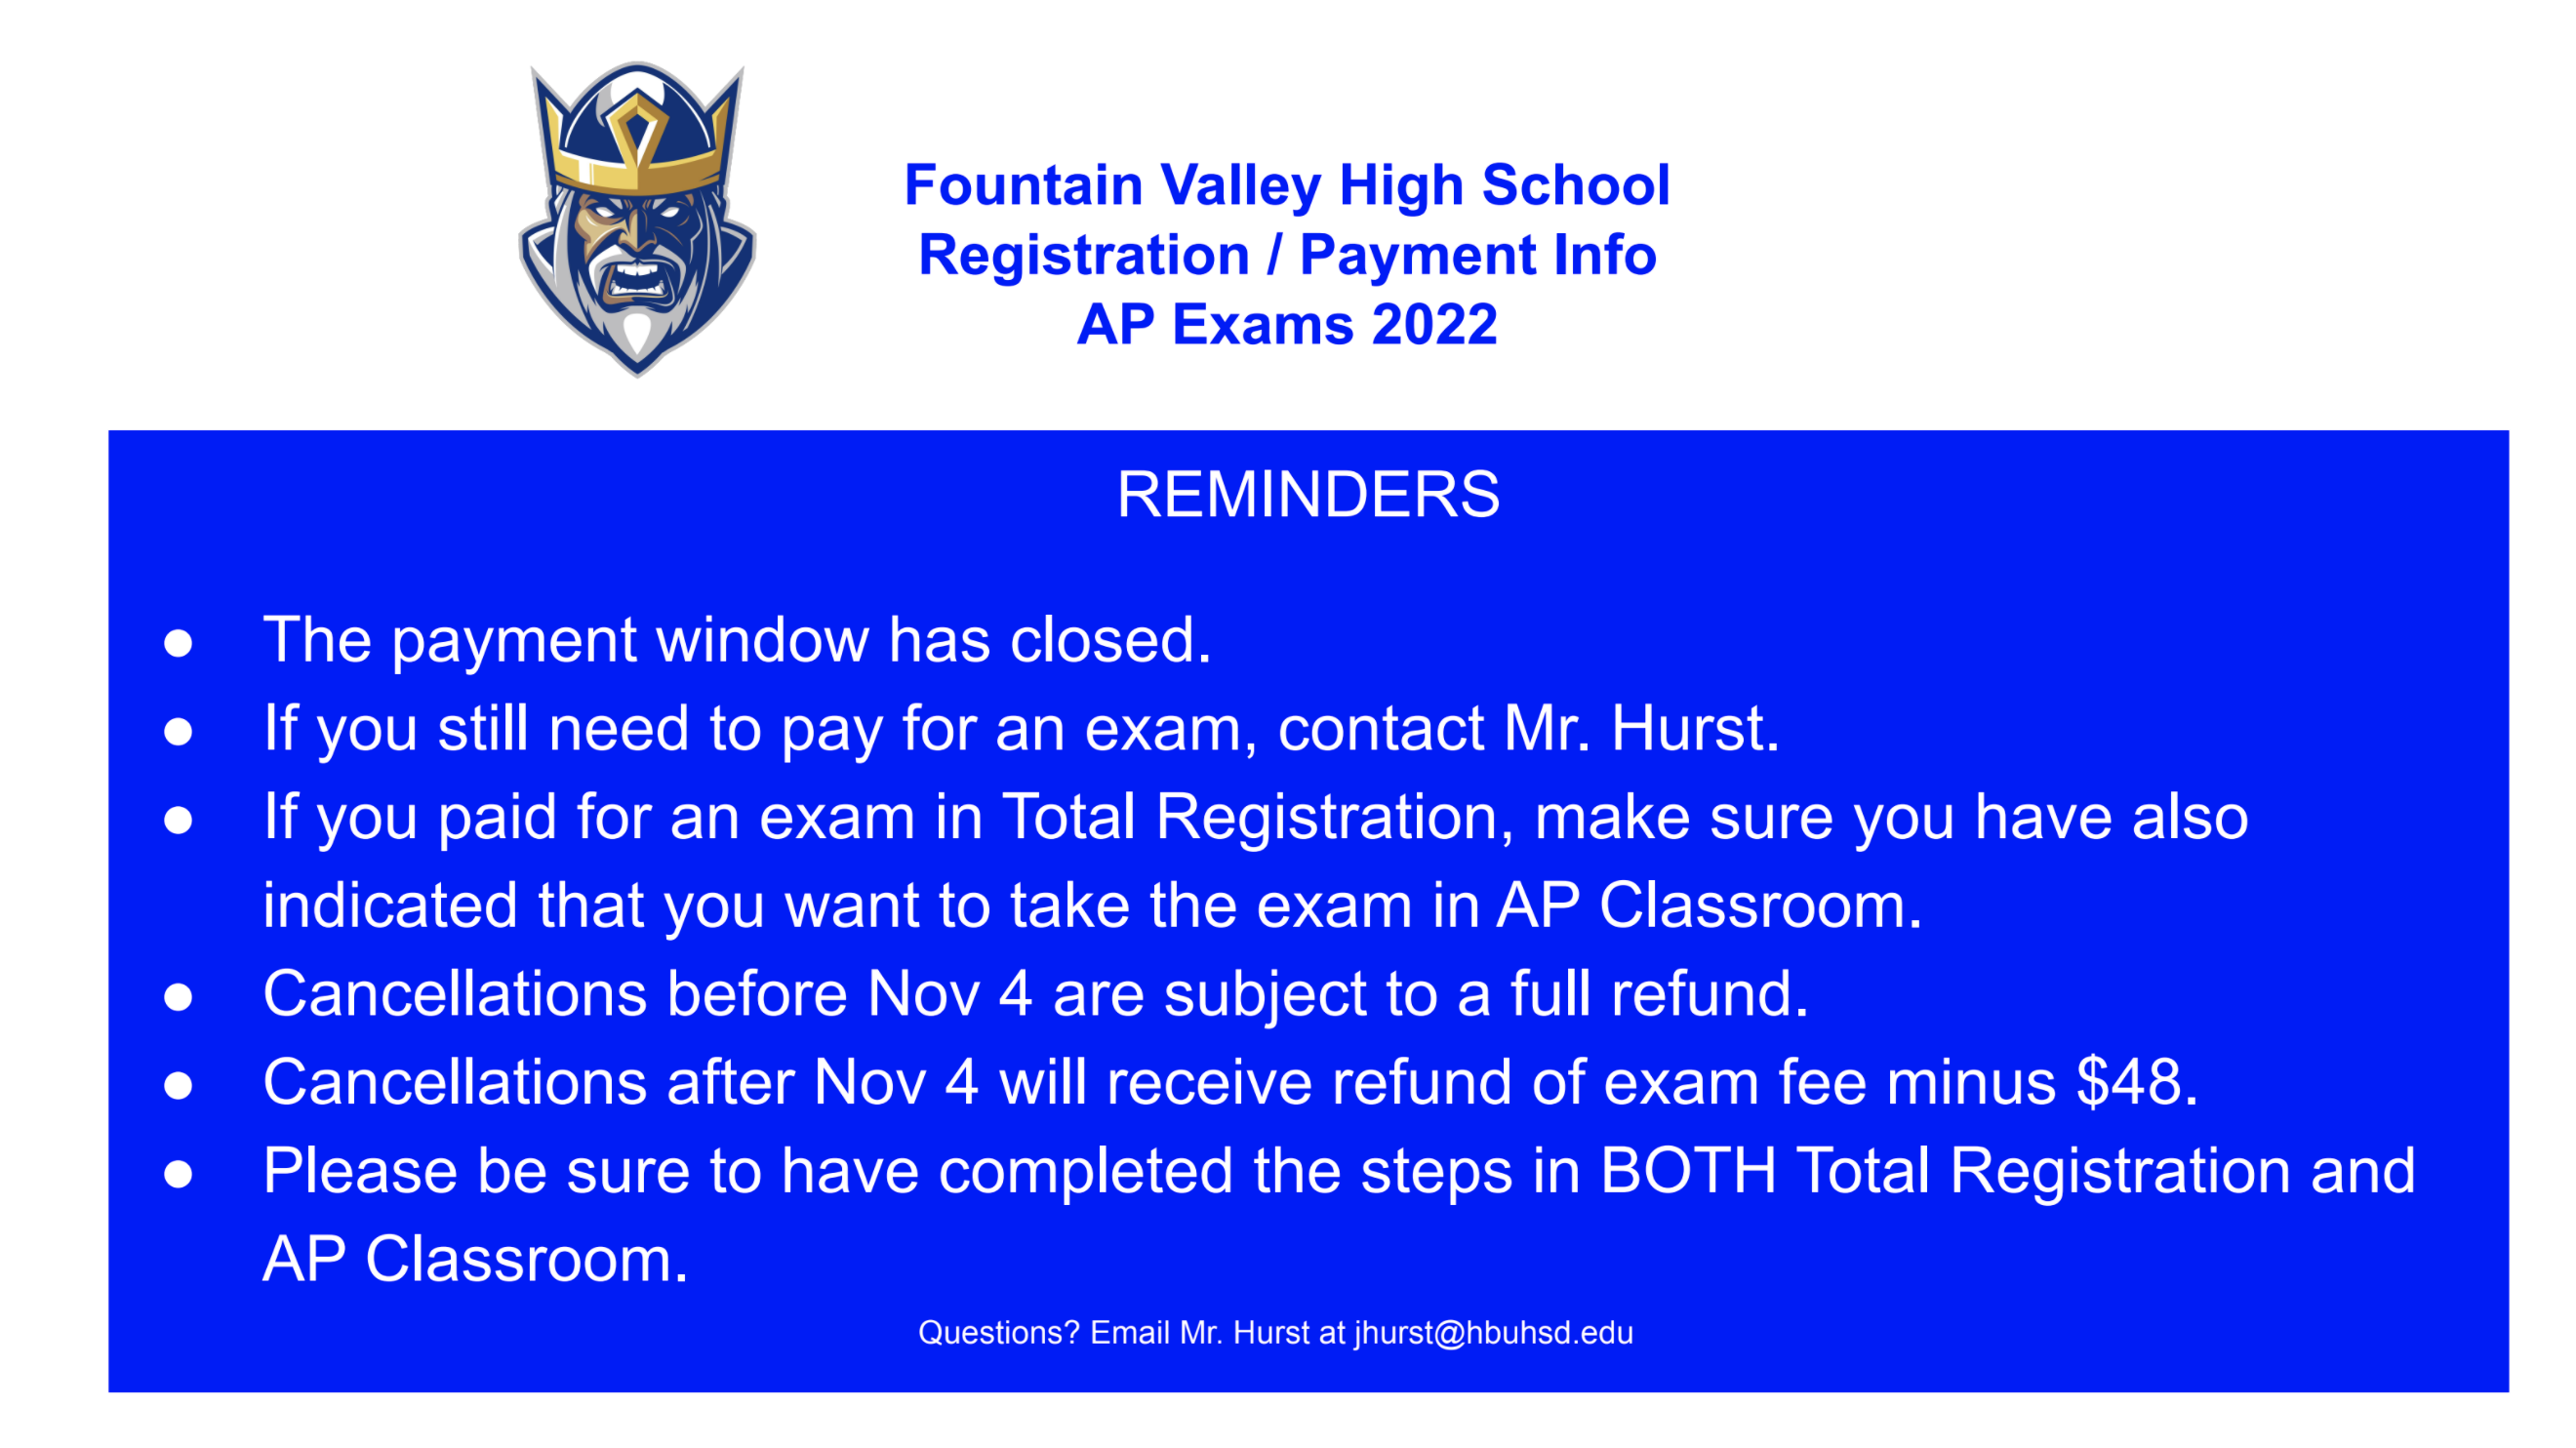 If you need any help with AP Testing email Mr. Hurst: jhurst@hbuhsd.edu